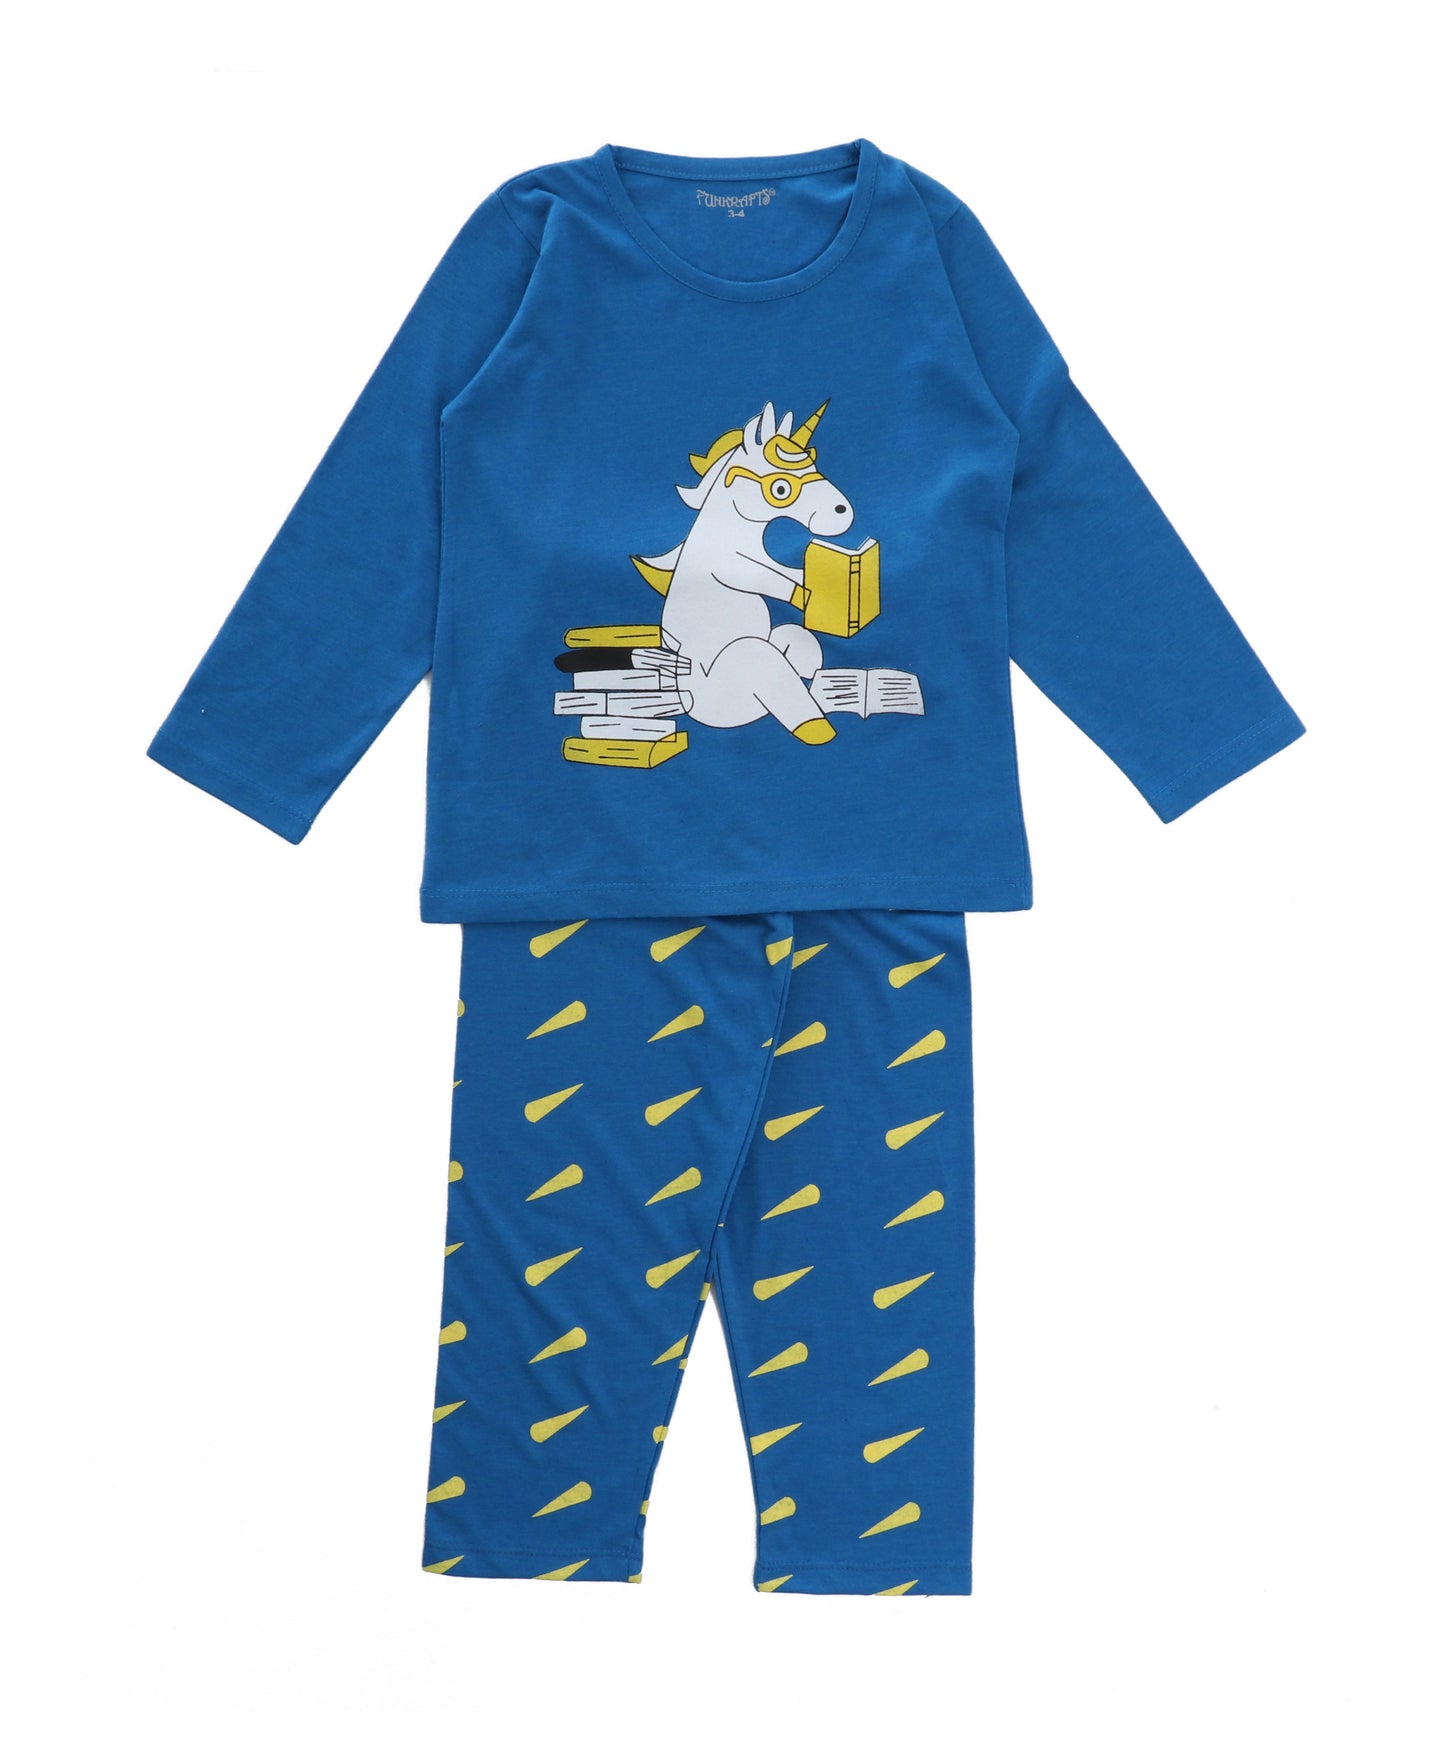 Blue & Grey Pure Cotton Knitted Full Sleeves Printed Nightsuit for Boys - Pack of 2